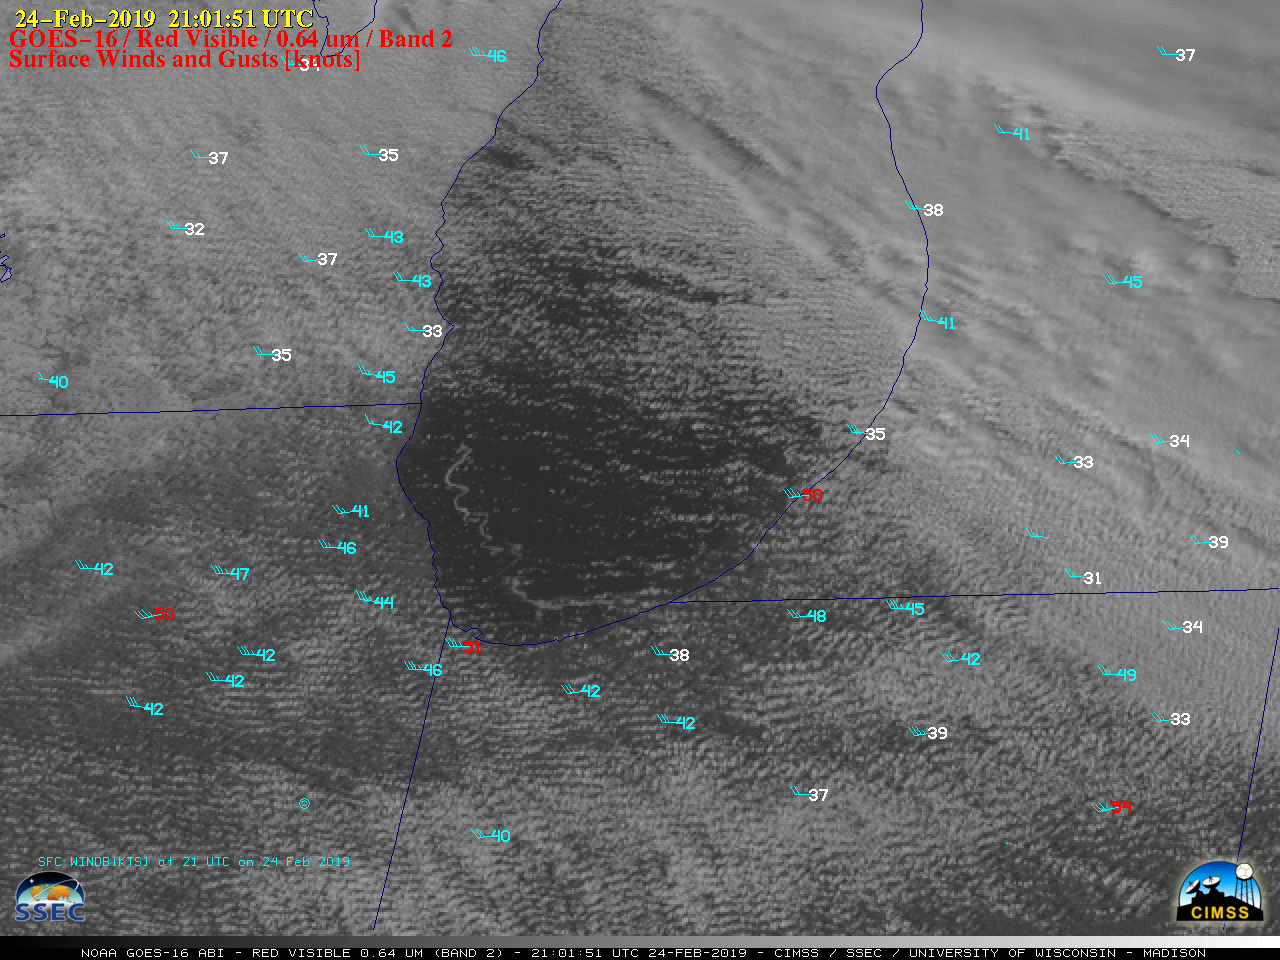 GOES-16 "Red" Visible (0.64 µm) images, with hourly plots of surfave winds and gusts in knots [click to play MP4 animation]